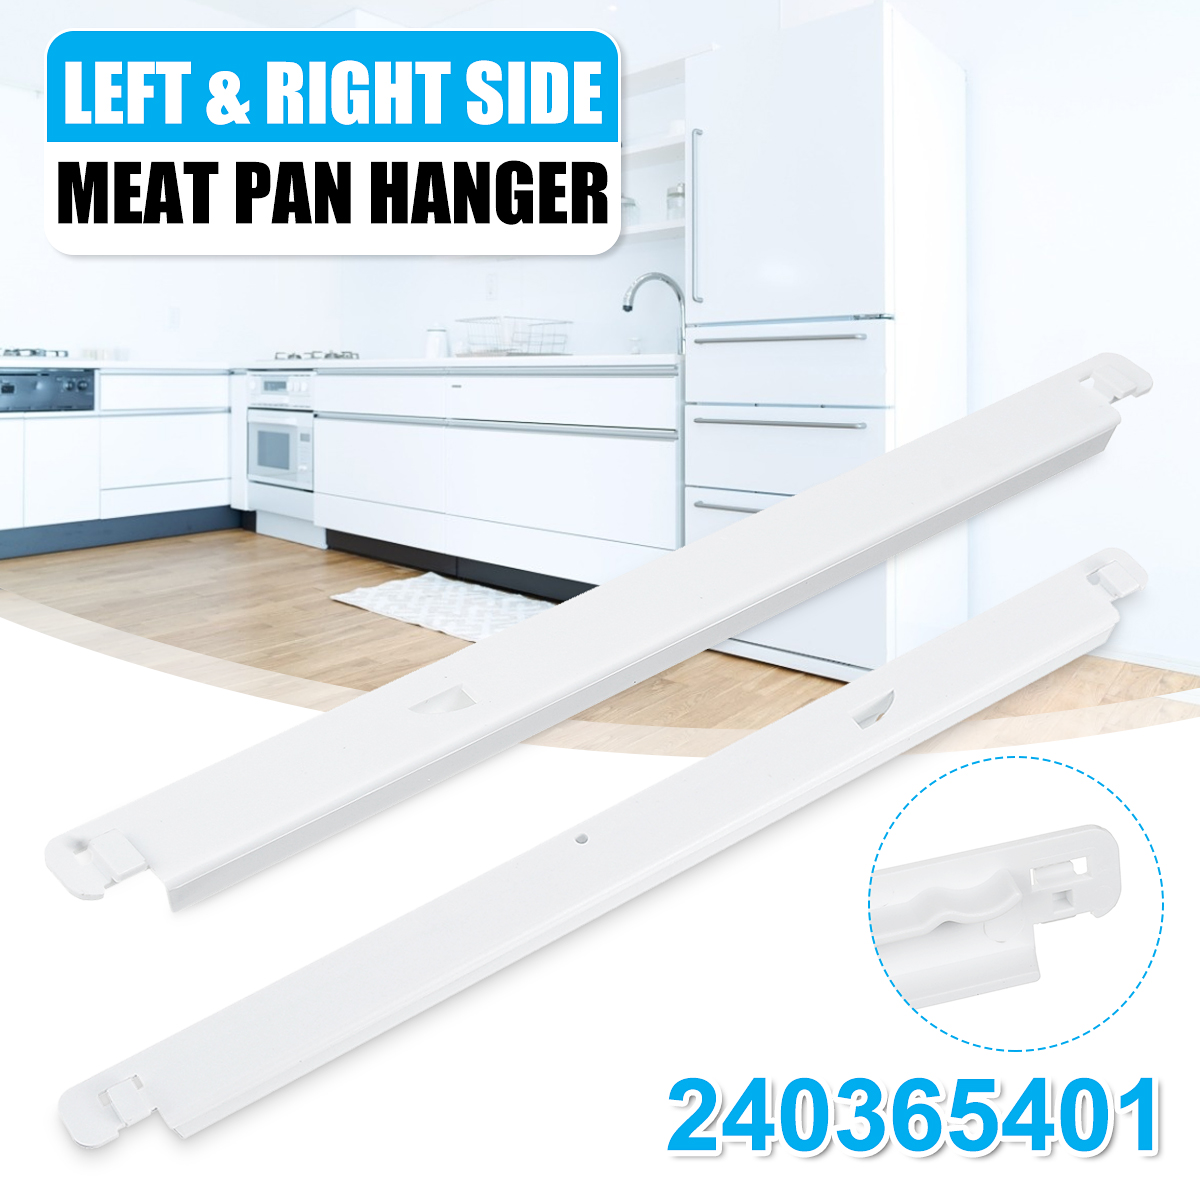 Left-Side-Meat-Pan-Hanger-Compatible-Track-BBQ-Grill-Pan-Hanger-for-Frigidaire-1632682-1